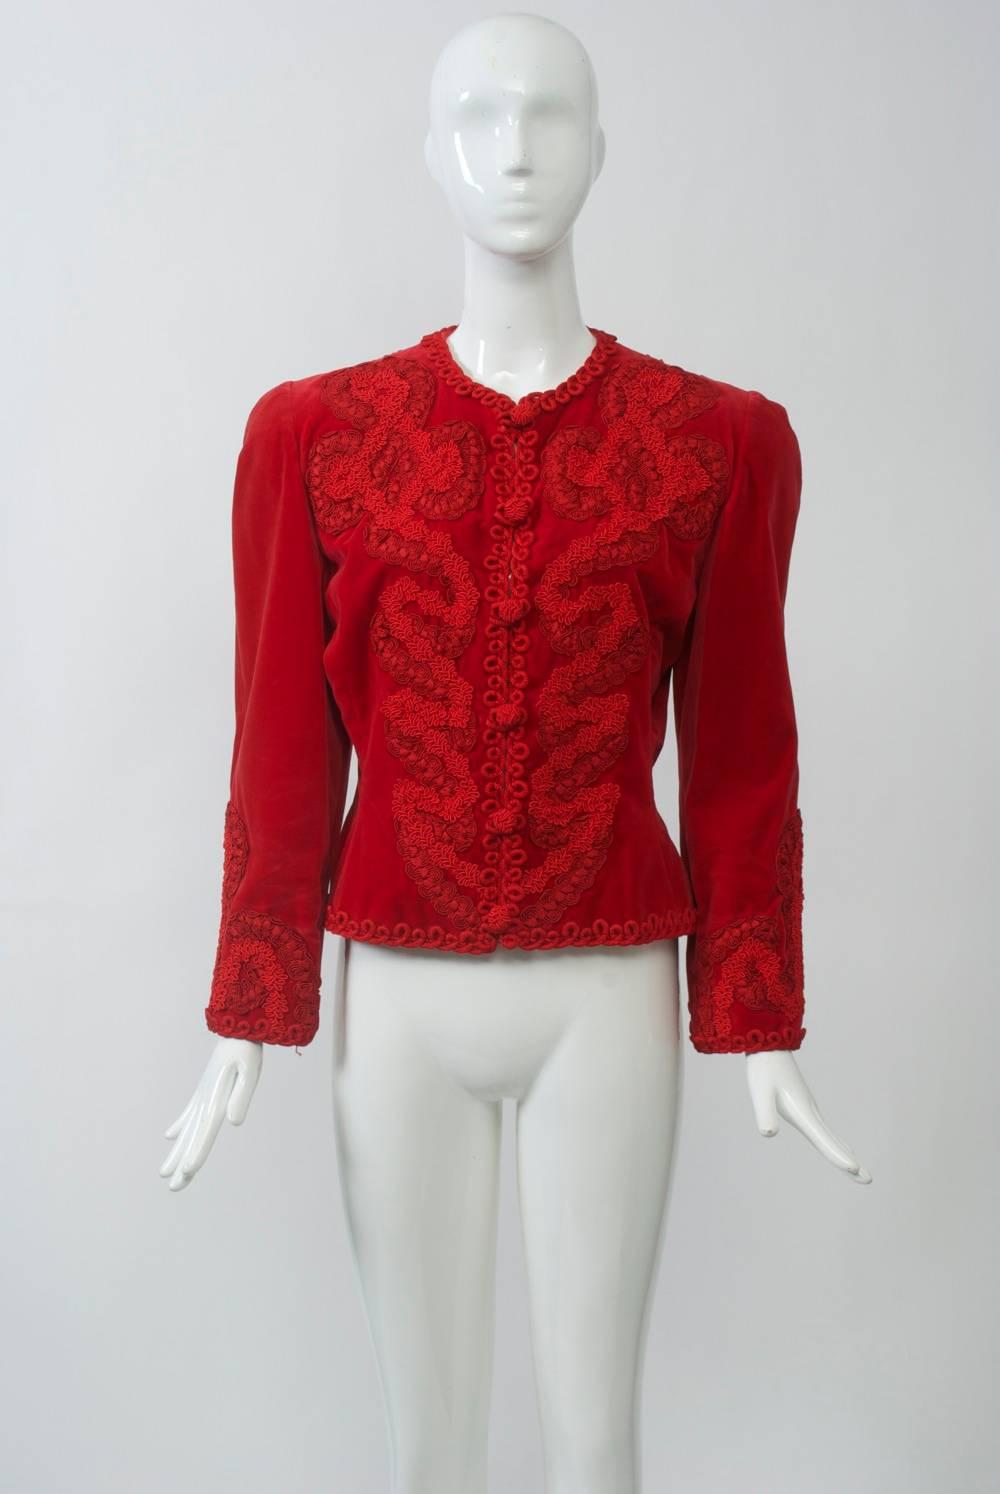 Red velvet jacket with elaborate soutache embroidery trim down front, across back yoke and at wrists. Fitted body, collarless neckline, front loop closures with knotted buttons. Hook and eye clasps underneath may have been added. Padded shoulders.